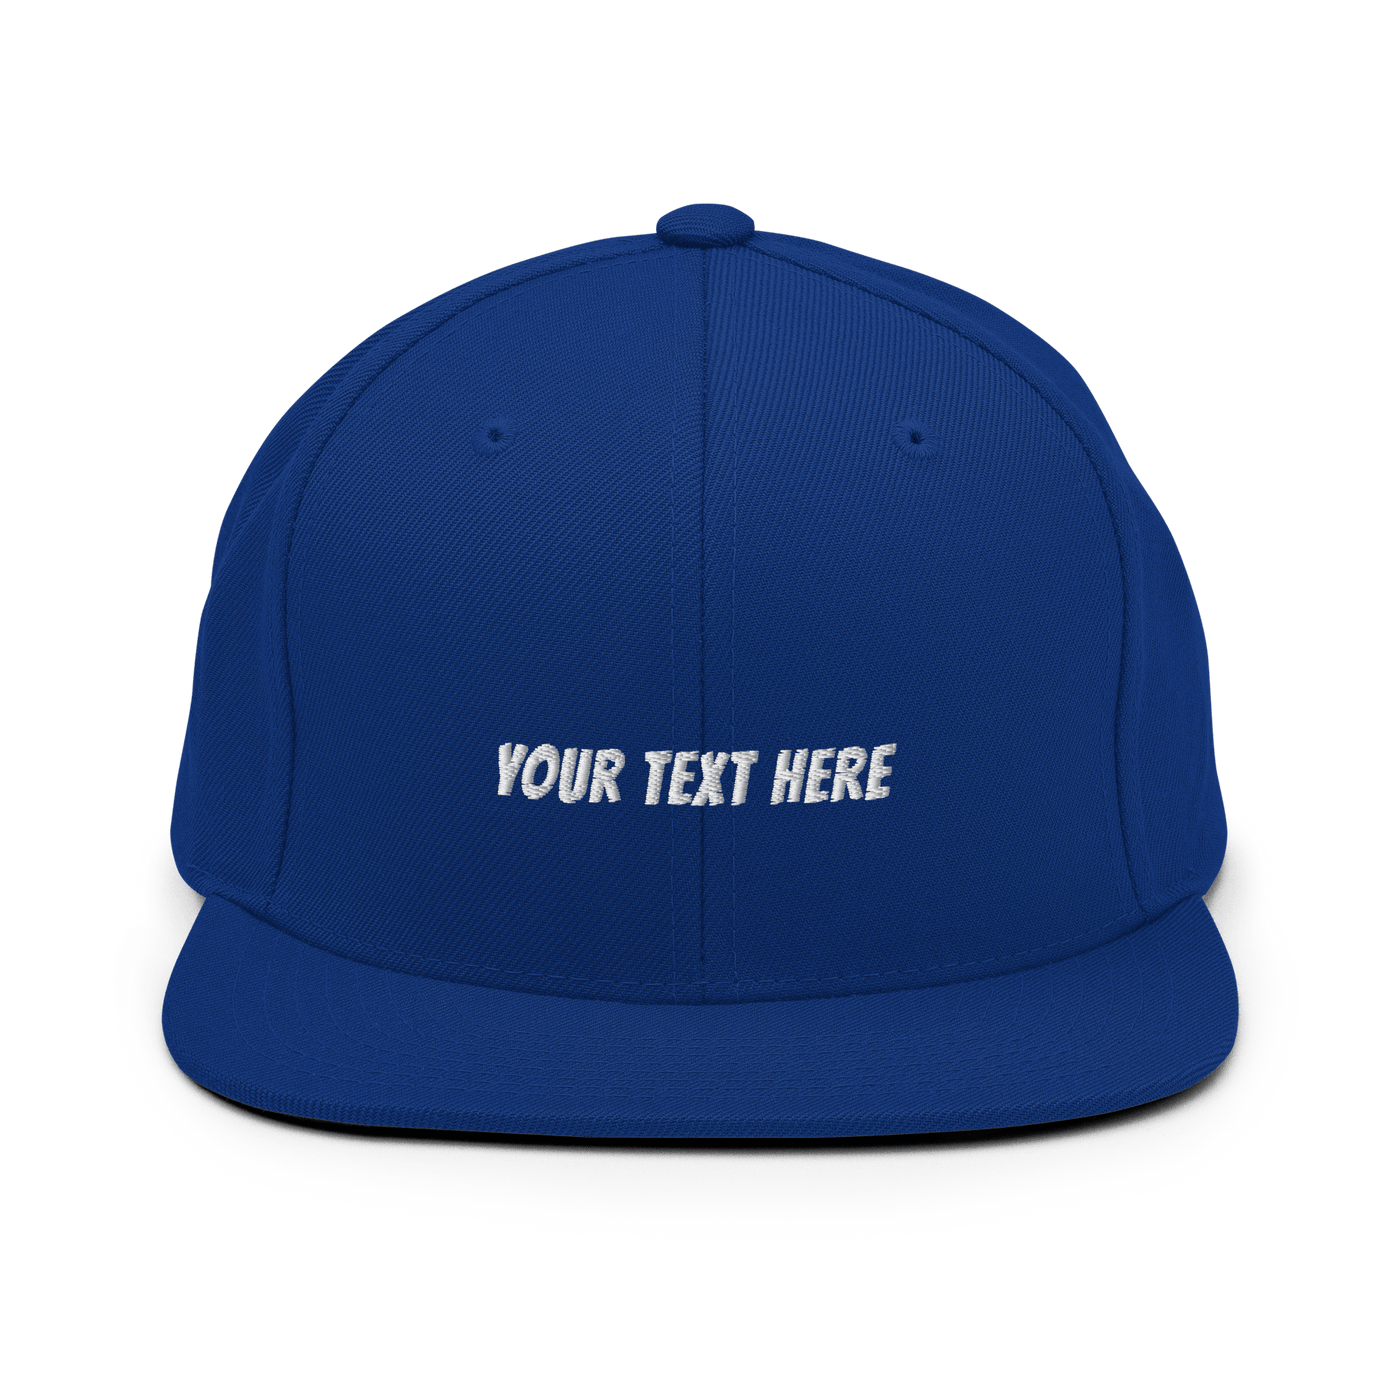 Customize Your Own Snapback Hat - Banger Font - Royal Blue - - Just Another Cap Store